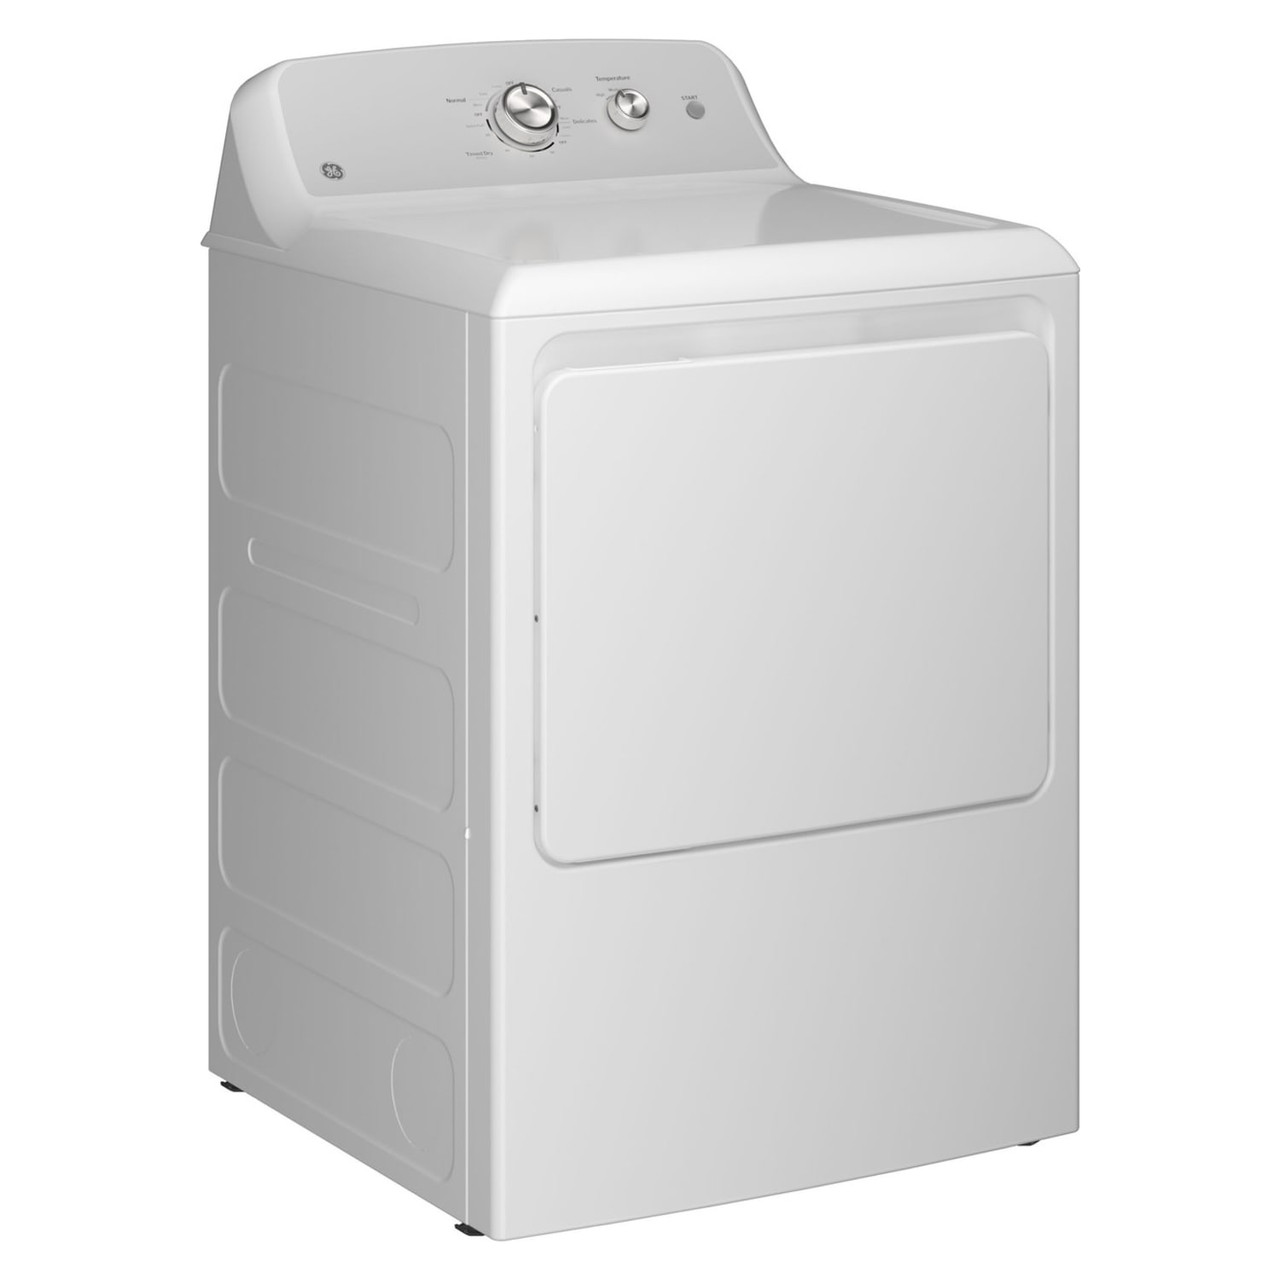 GE® 7.2 cu. ft. Capacity Electric Dryer with Up To 120 ft. Venting​ and Reversible Door​ - GTD38EASWWS